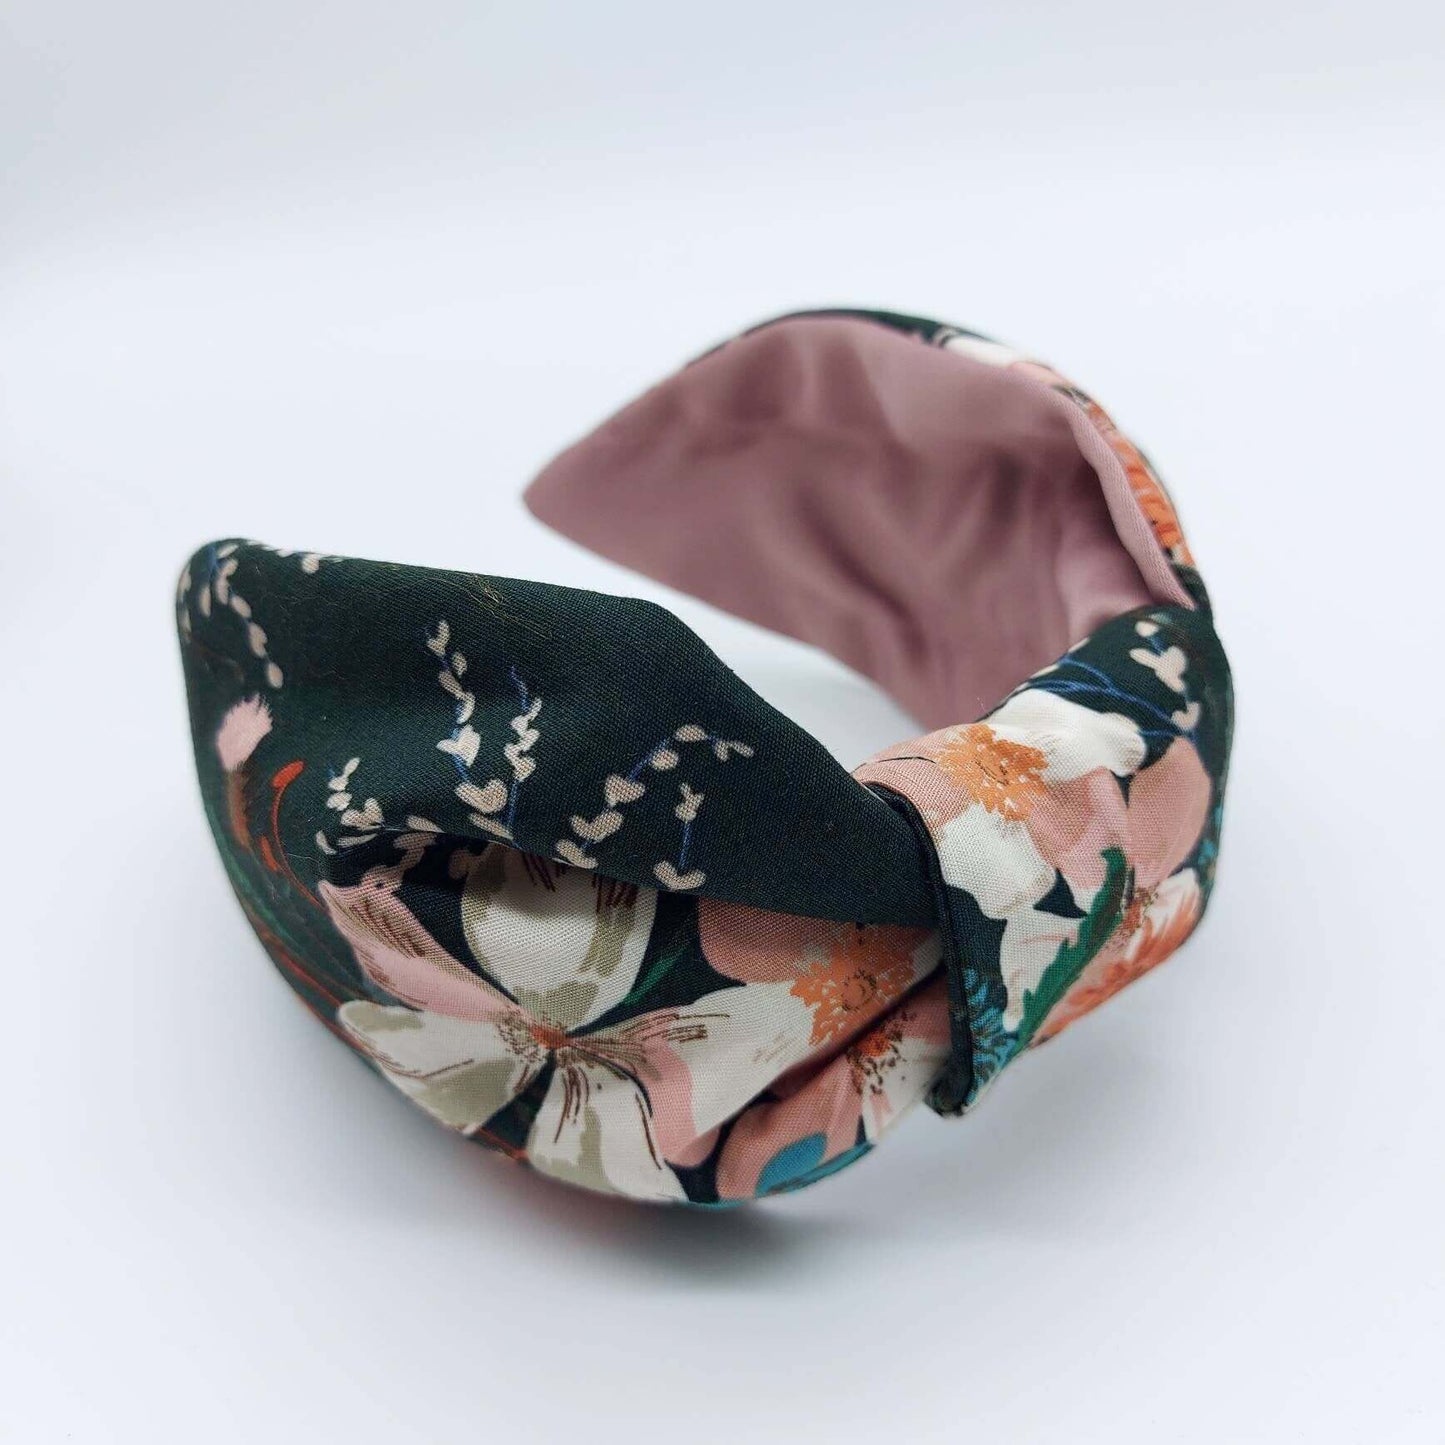 A bow-style, knot headband made from dark green fabric with orange and pink flowers and a pink satin lining underneath.